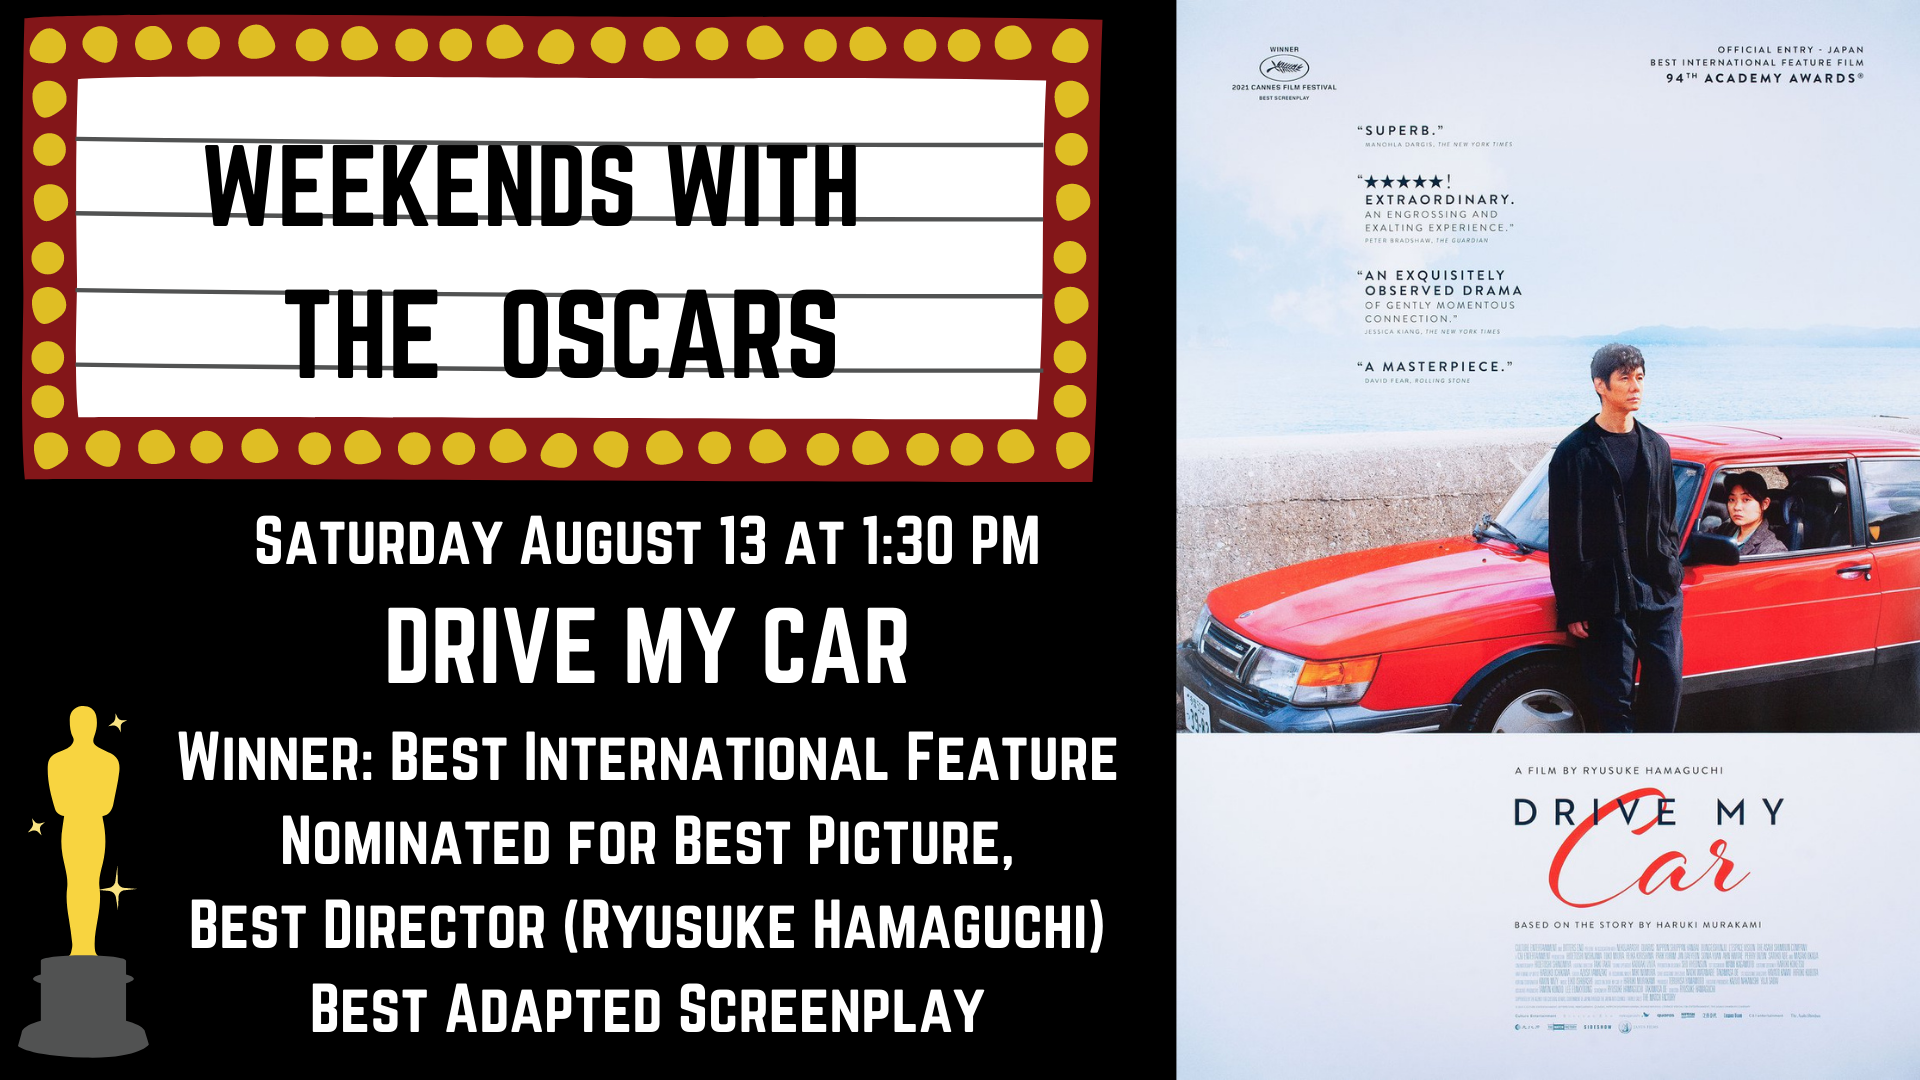 Banner advertising our screening of DRIVE MY CAR on August 13 at 1:30 PM, featuring the movie poster.